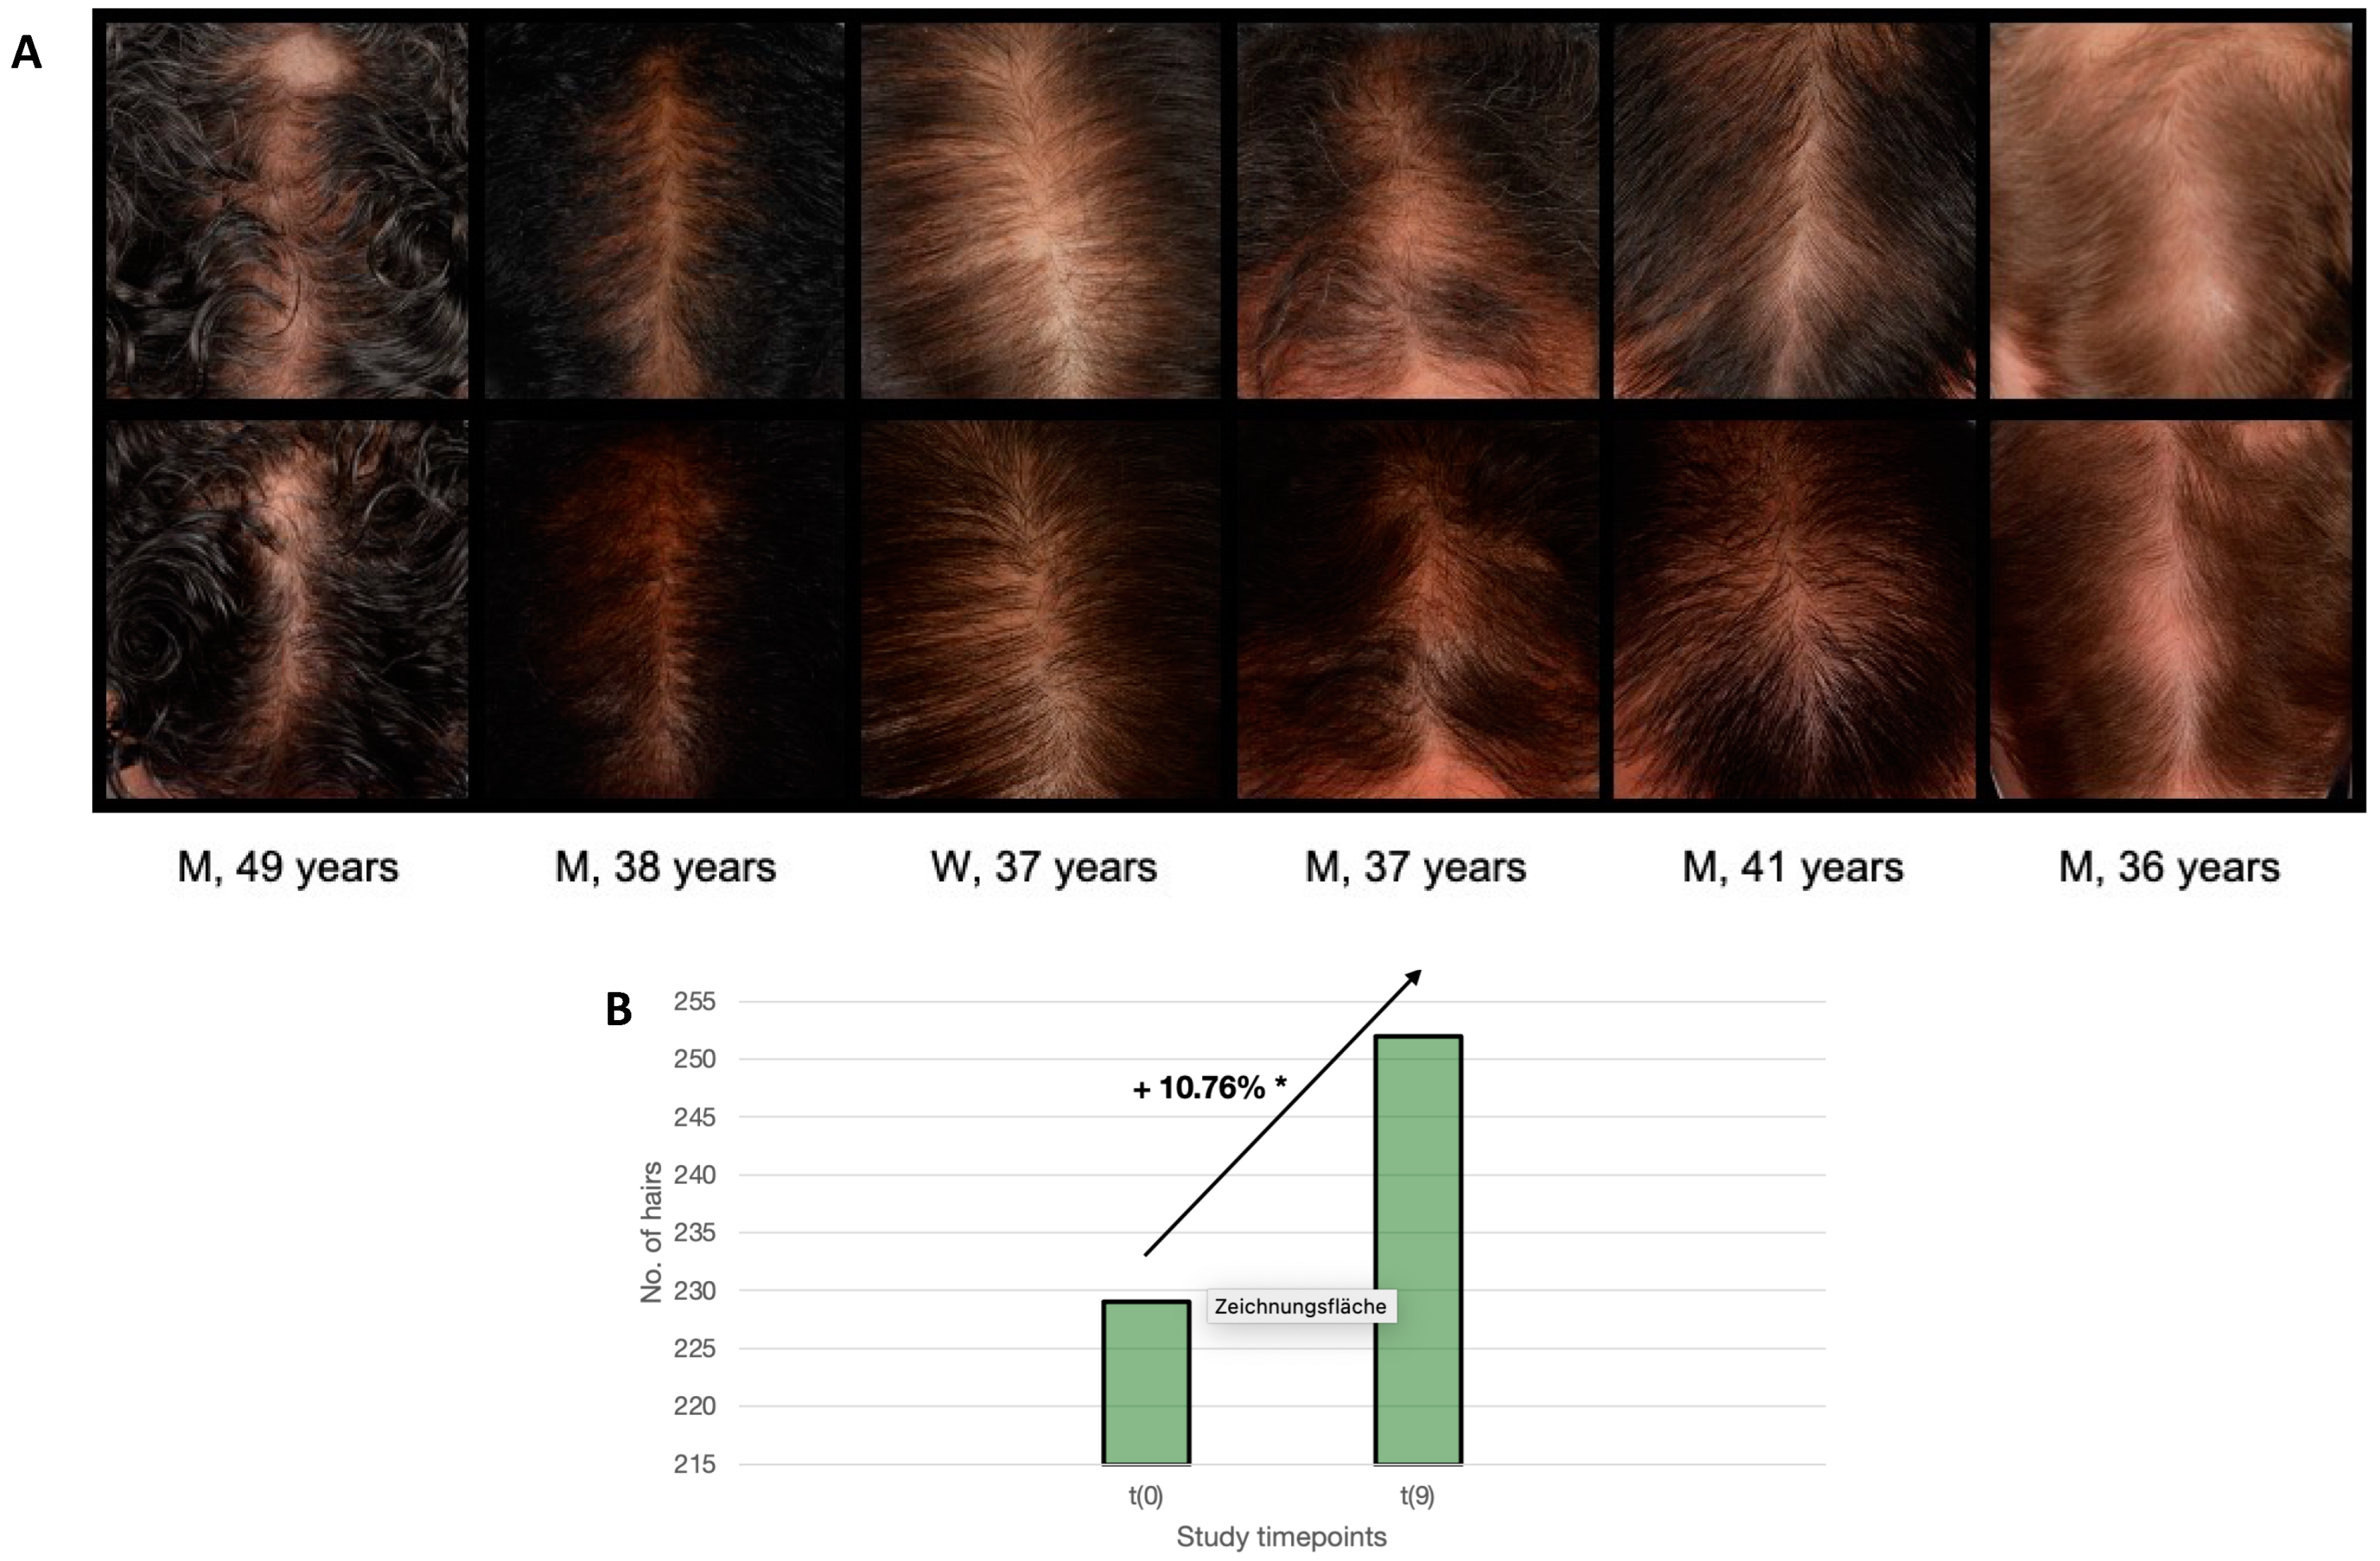 JCM | Free Full-Text | A Novel Hair Restoration Technology Counteracts  Androgenic Hair Loss and Promotes Hair Growth in A Blinded Clinical Trial